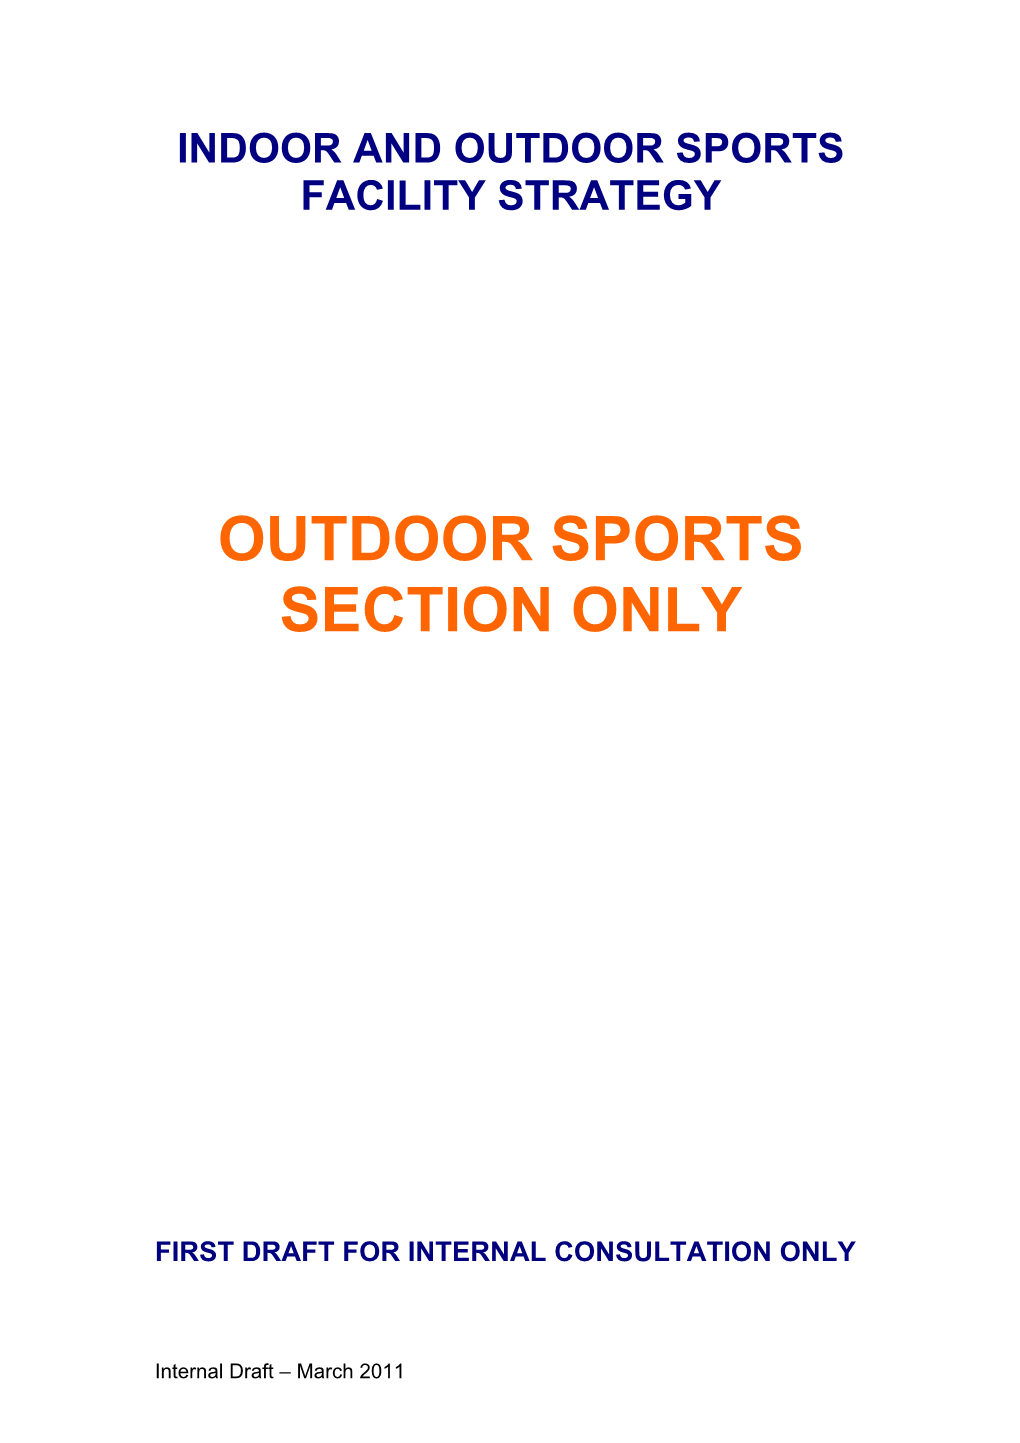 Outdoor Sports Facility Strategy